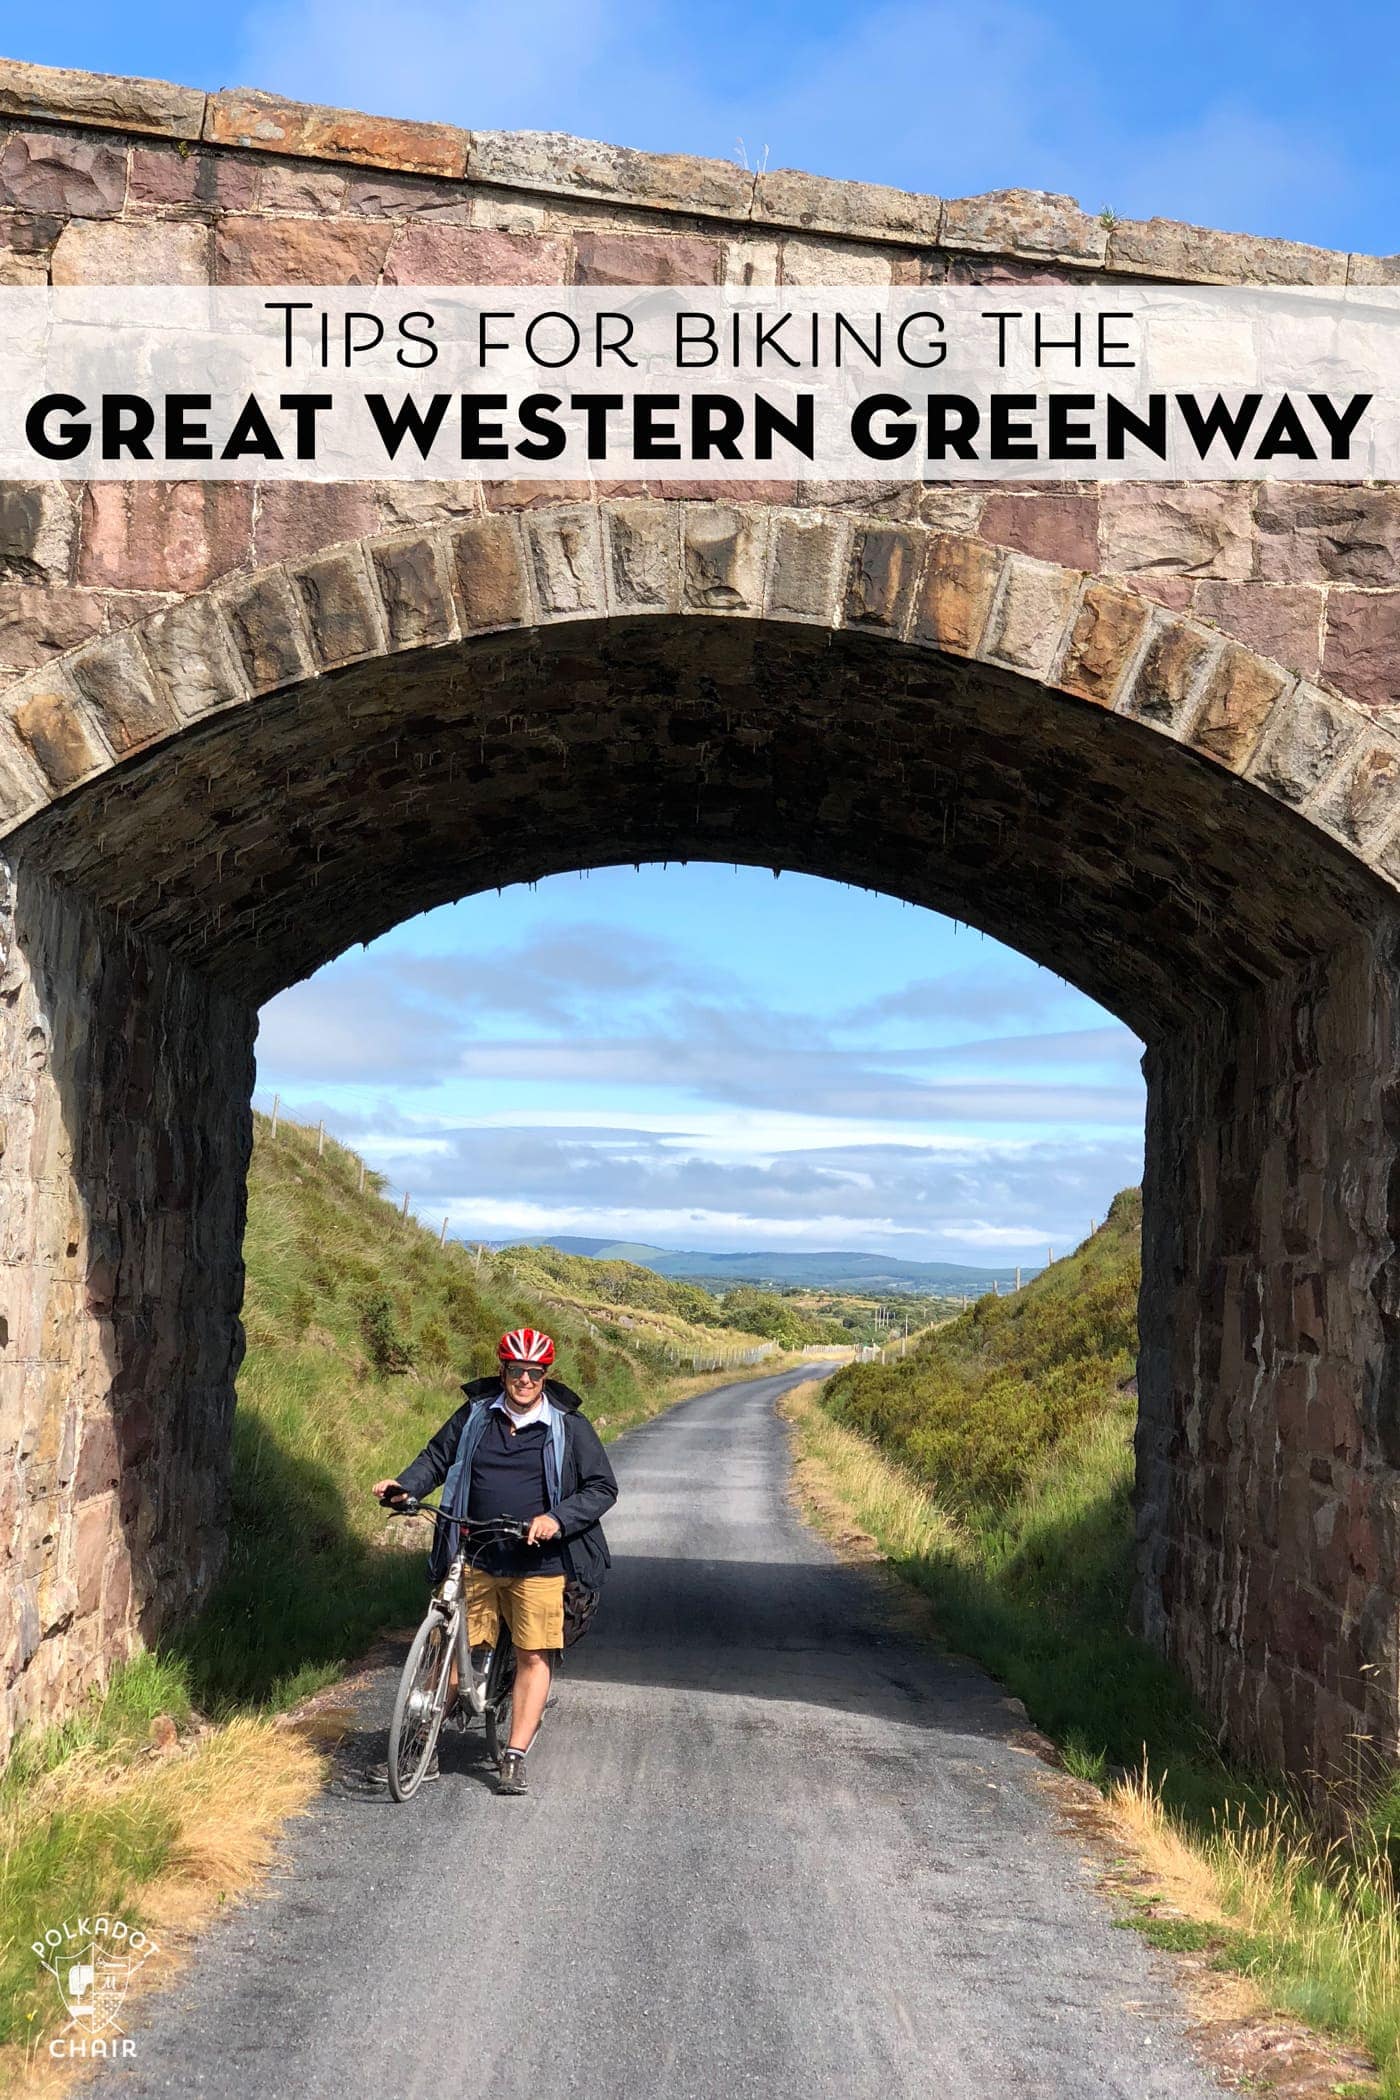 Tips for Biking the Great Western Greenway in Ireland